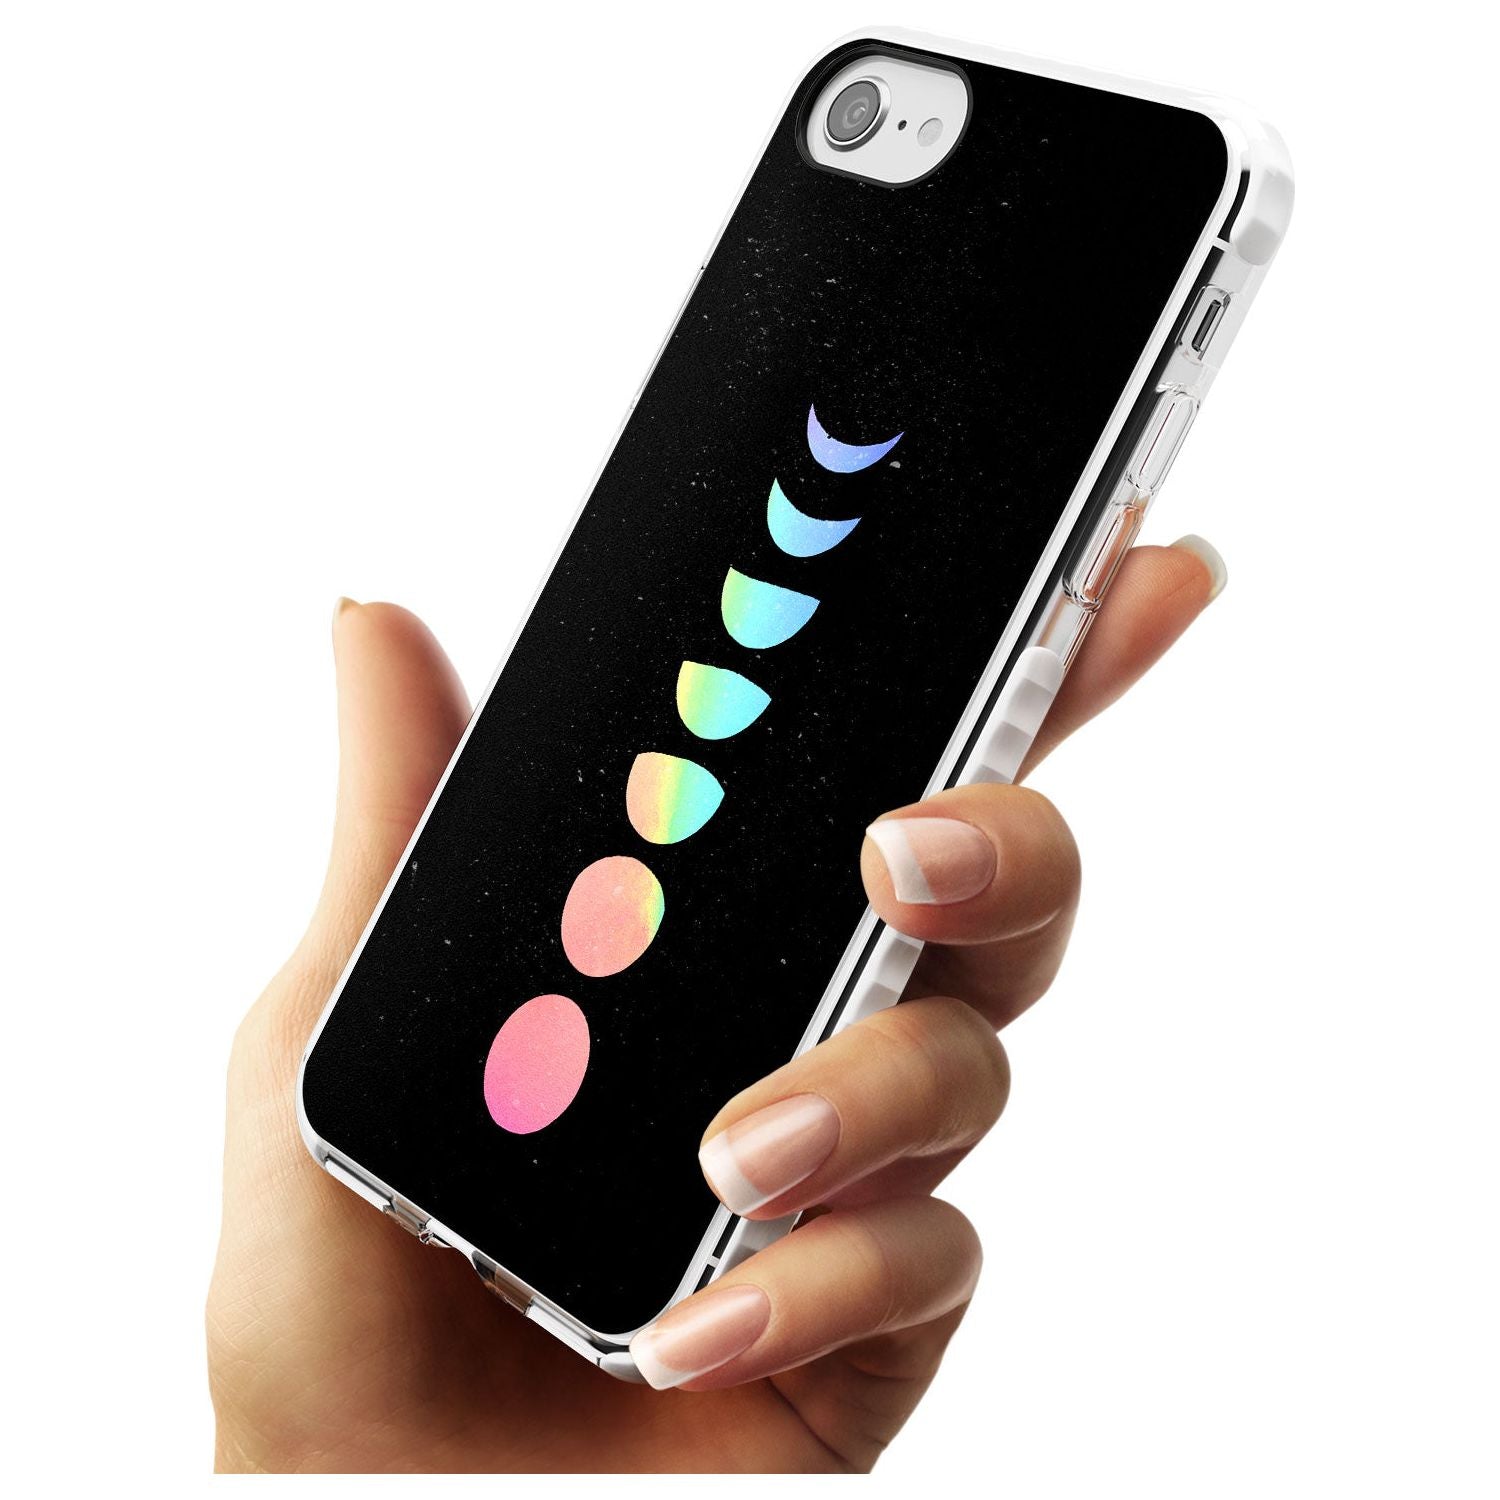 Pastel Moon Phases Slim TPU Phone Case for iPhone SE 8 7 Plus